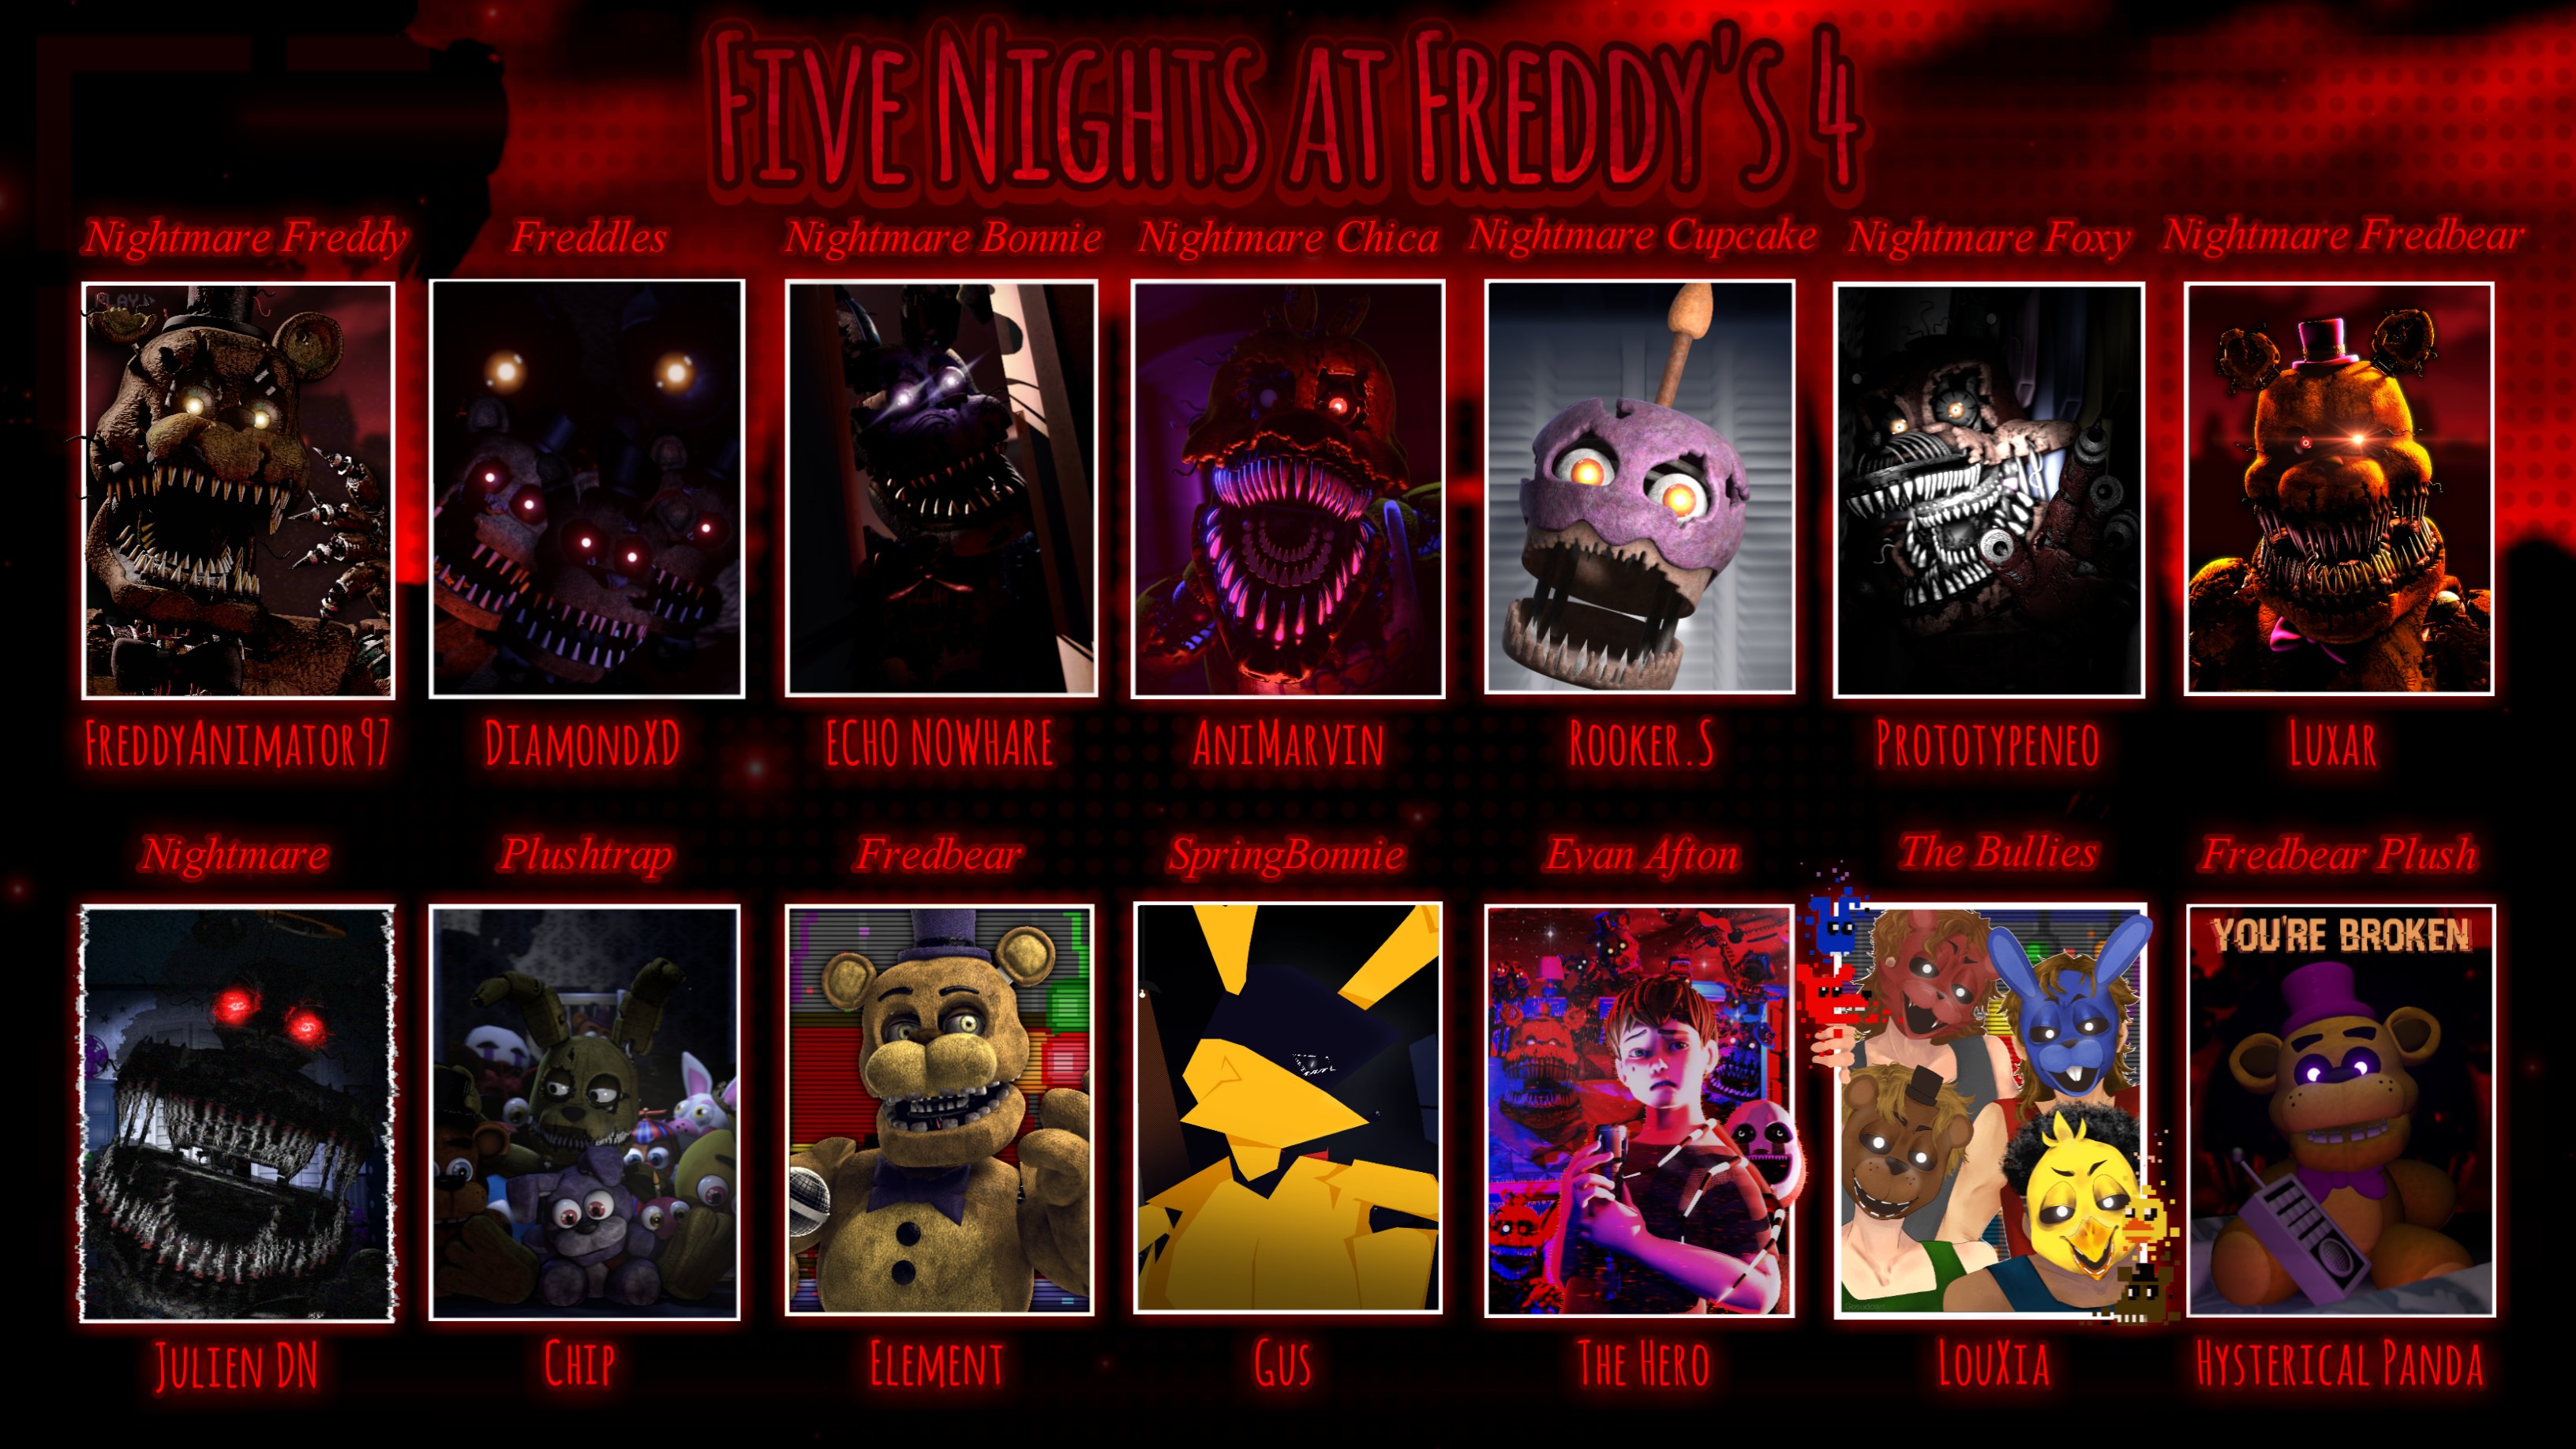 Five Nights At Freddy's 4: Halloween Edition